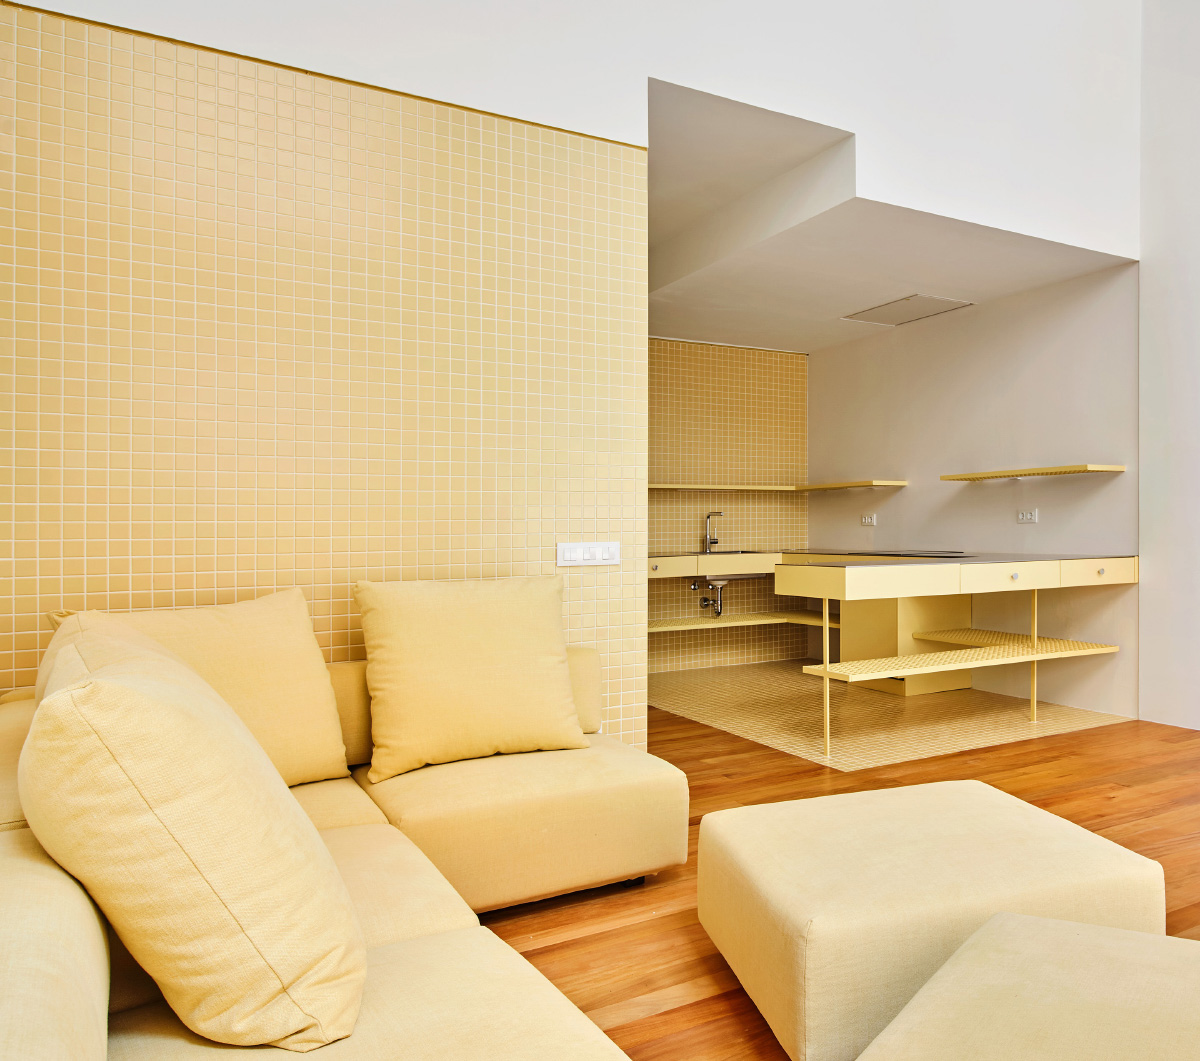 Interior of an apartment complex with gold-tiled walls